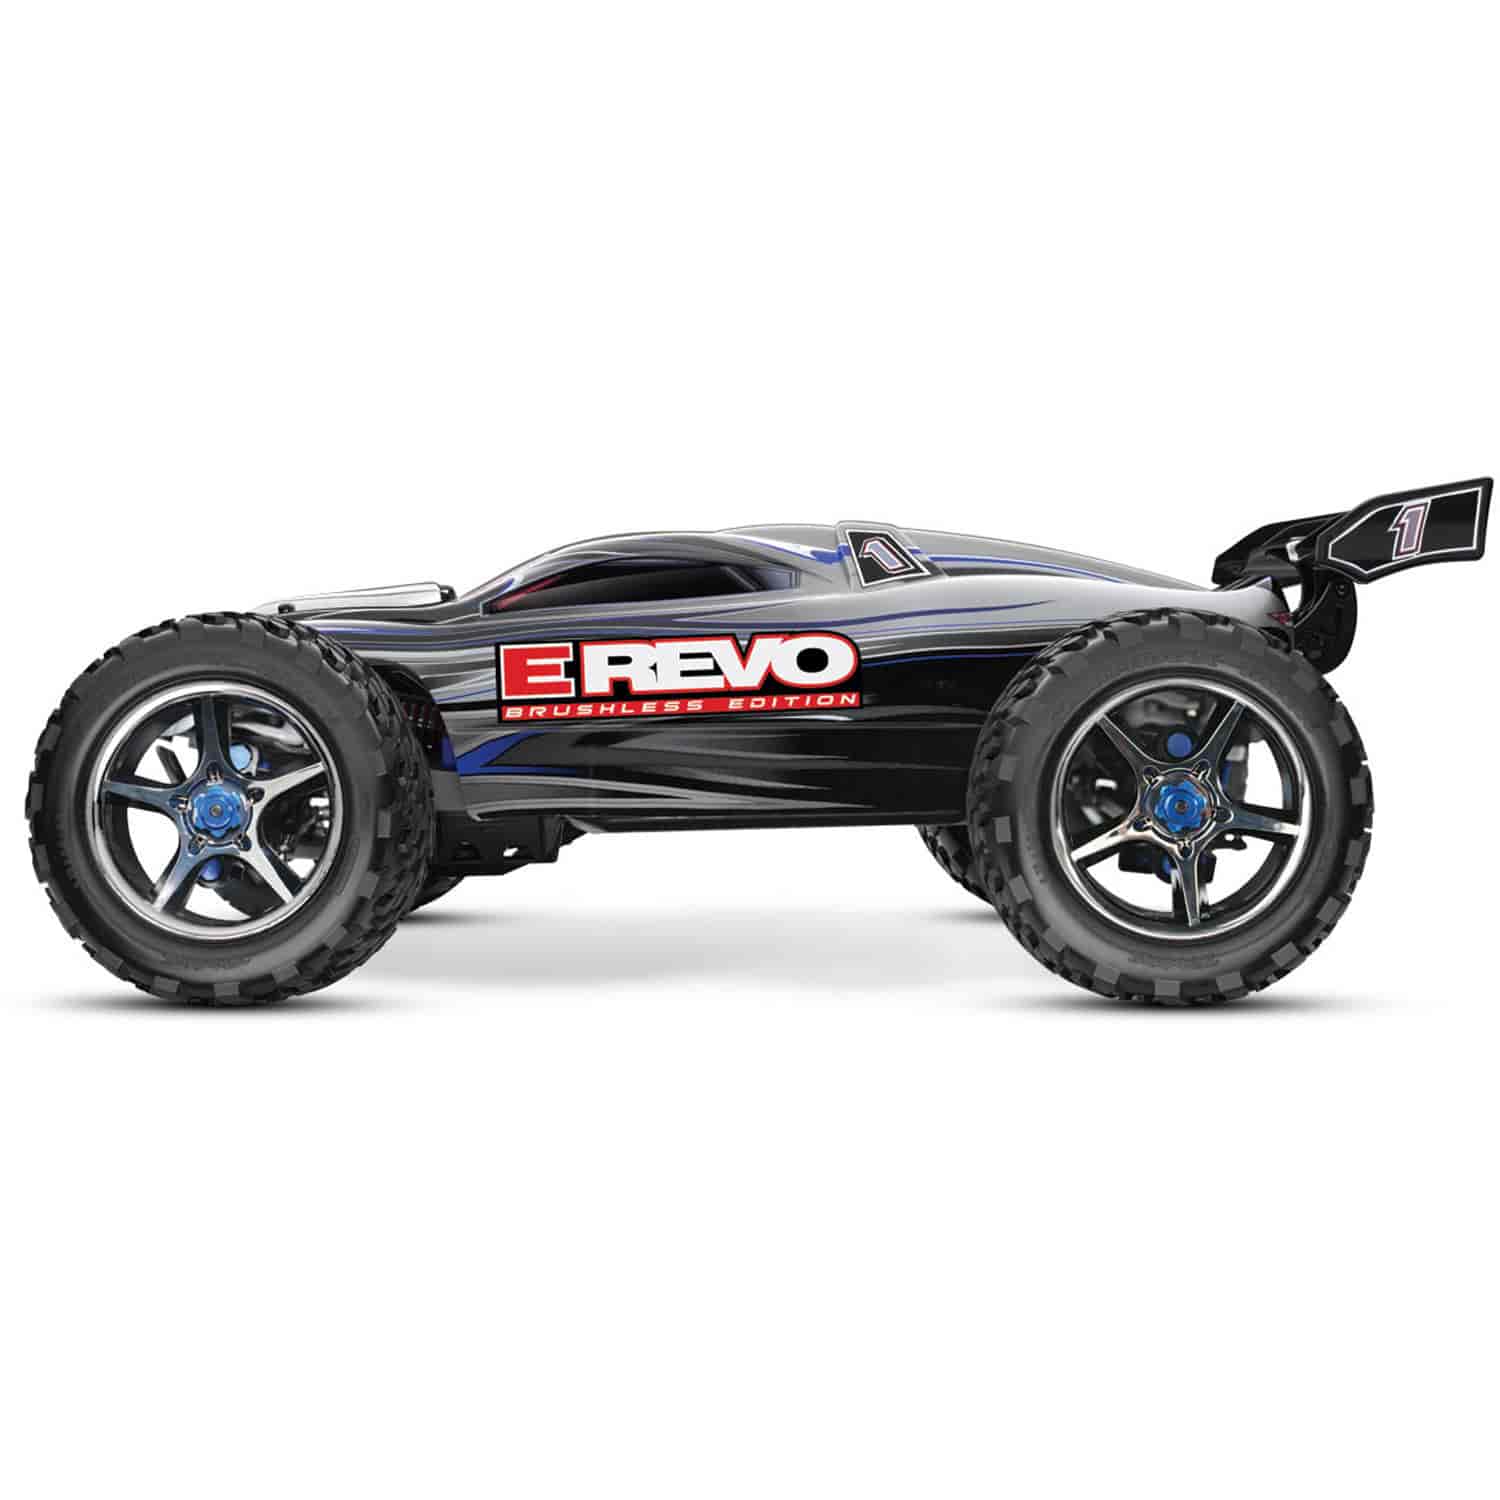 *USED - Traxxas E-Revo Brushless Truck Fully Assembled, Ready-To-Race